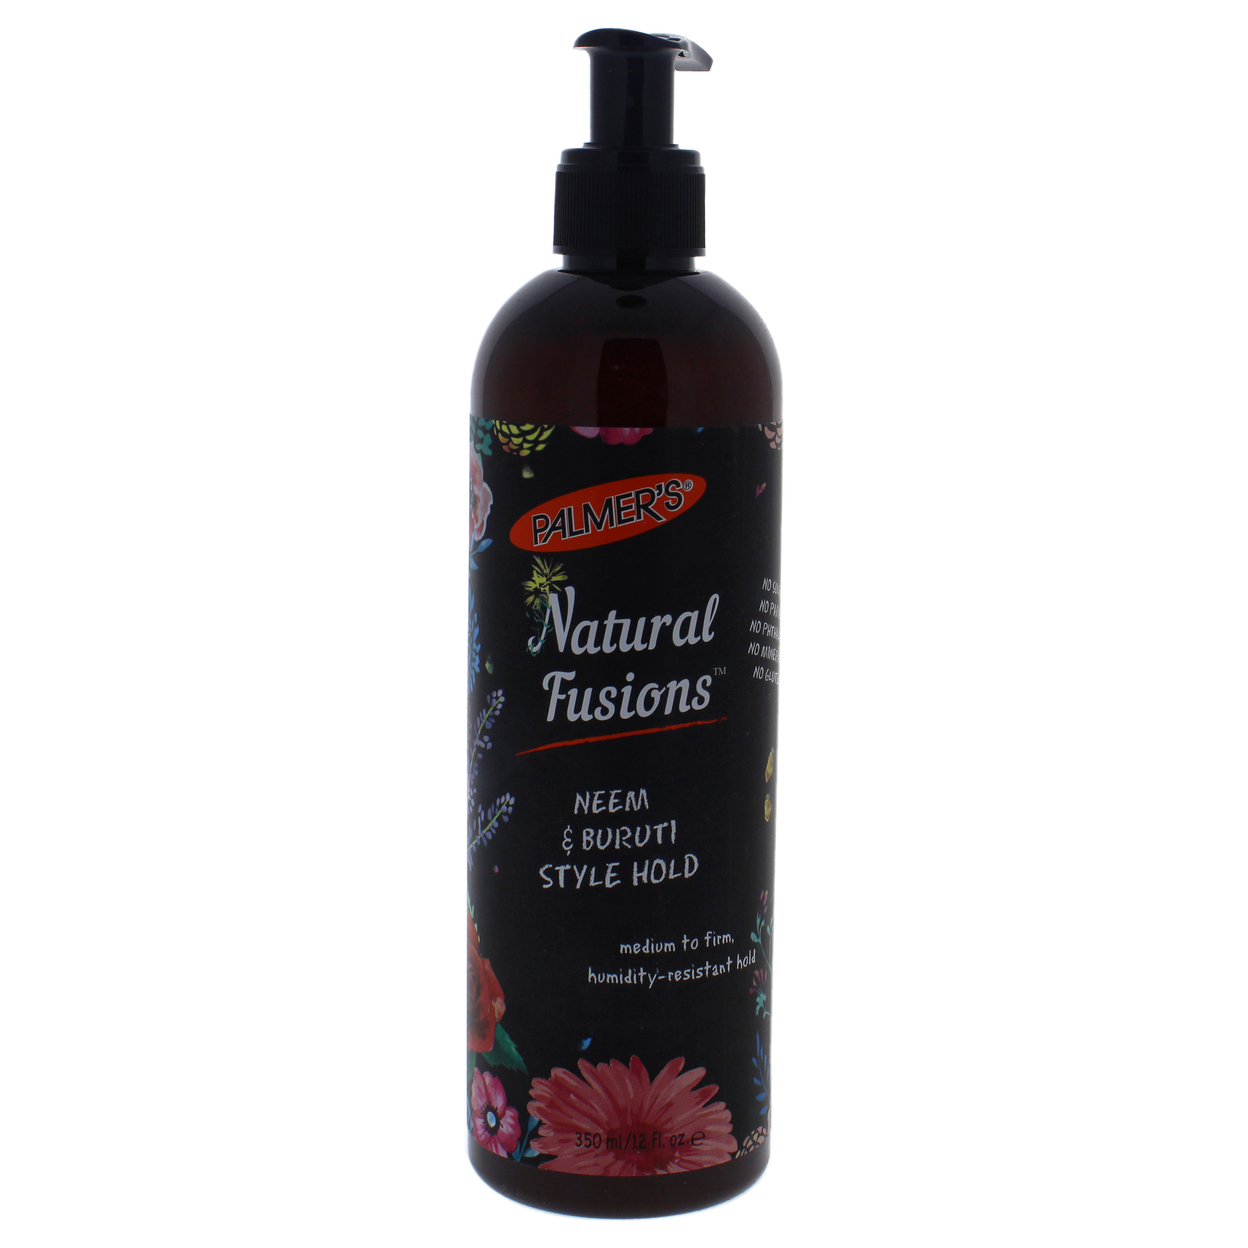 Palmers Natural Fusions Neem And Buruti Style Hold Gel 12 Oz